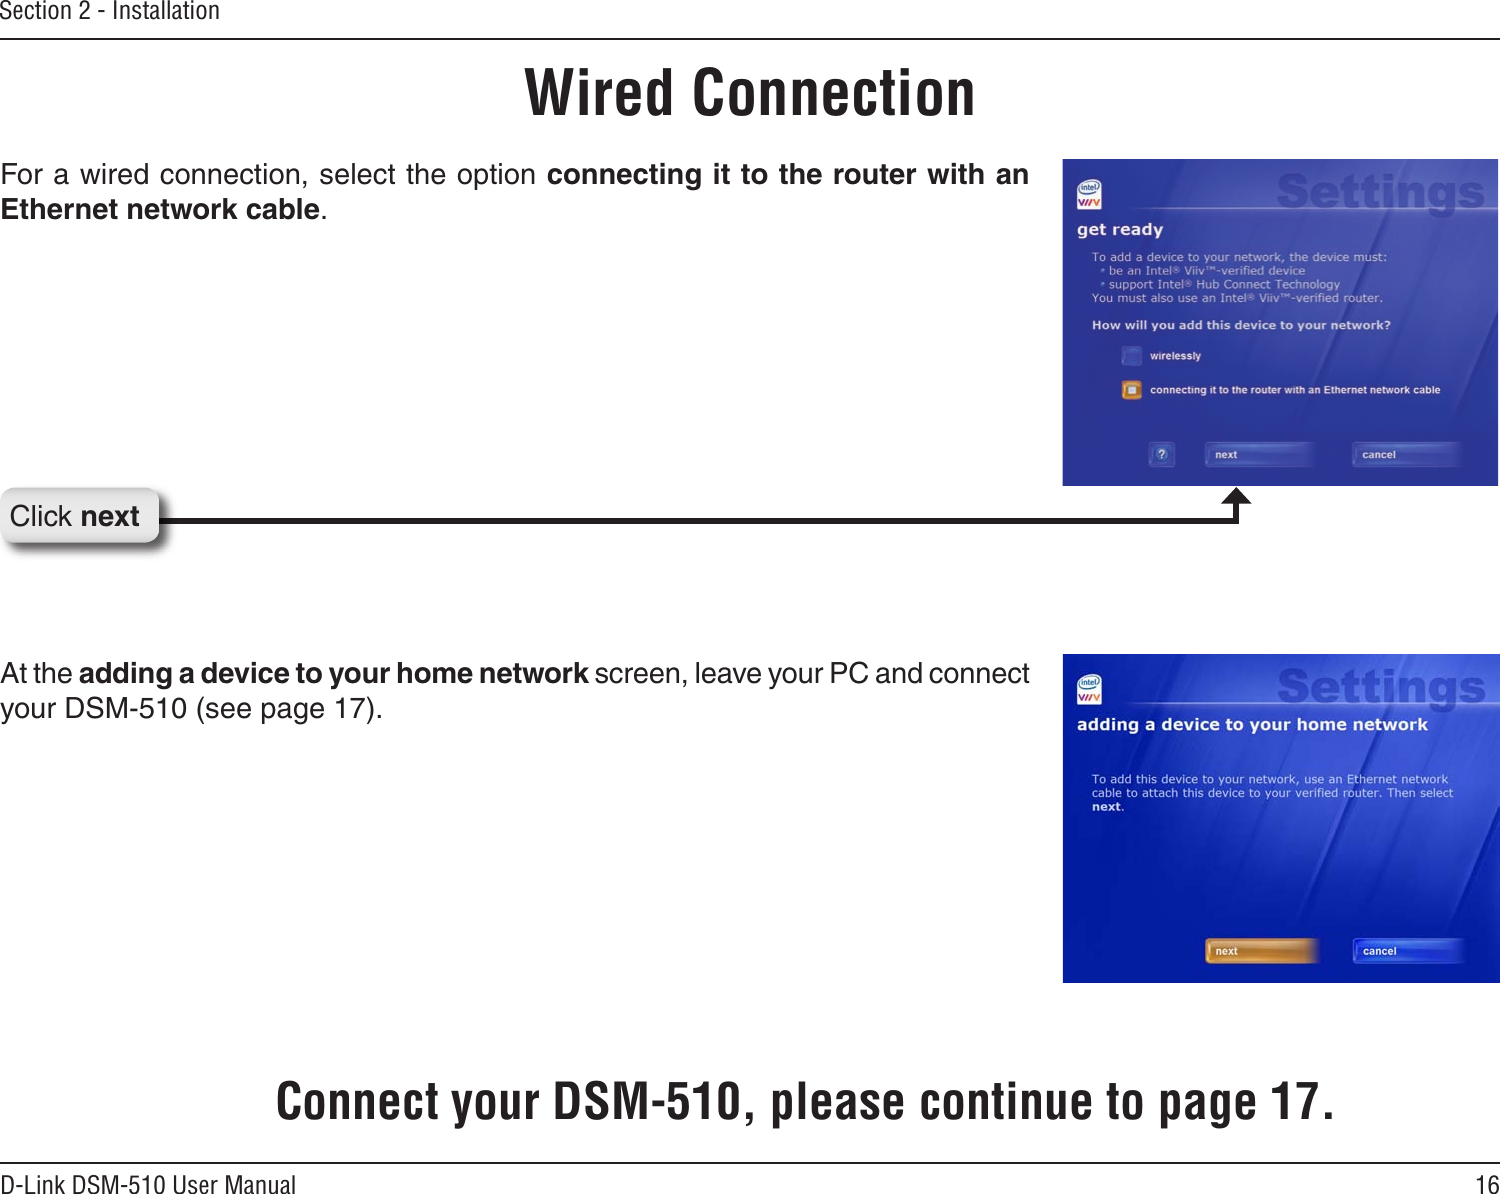 16D-Link DSM-510 User ManualSection 2 - InstallationClick nextWired ConnectionConnect your DSM-510, please continue to page 17.At the adding a device to your home network screen, leave your PC and connect your DSM-510 (see page 17).For a wired connection, select the option connecting it to the router with an Ethernet network cable.